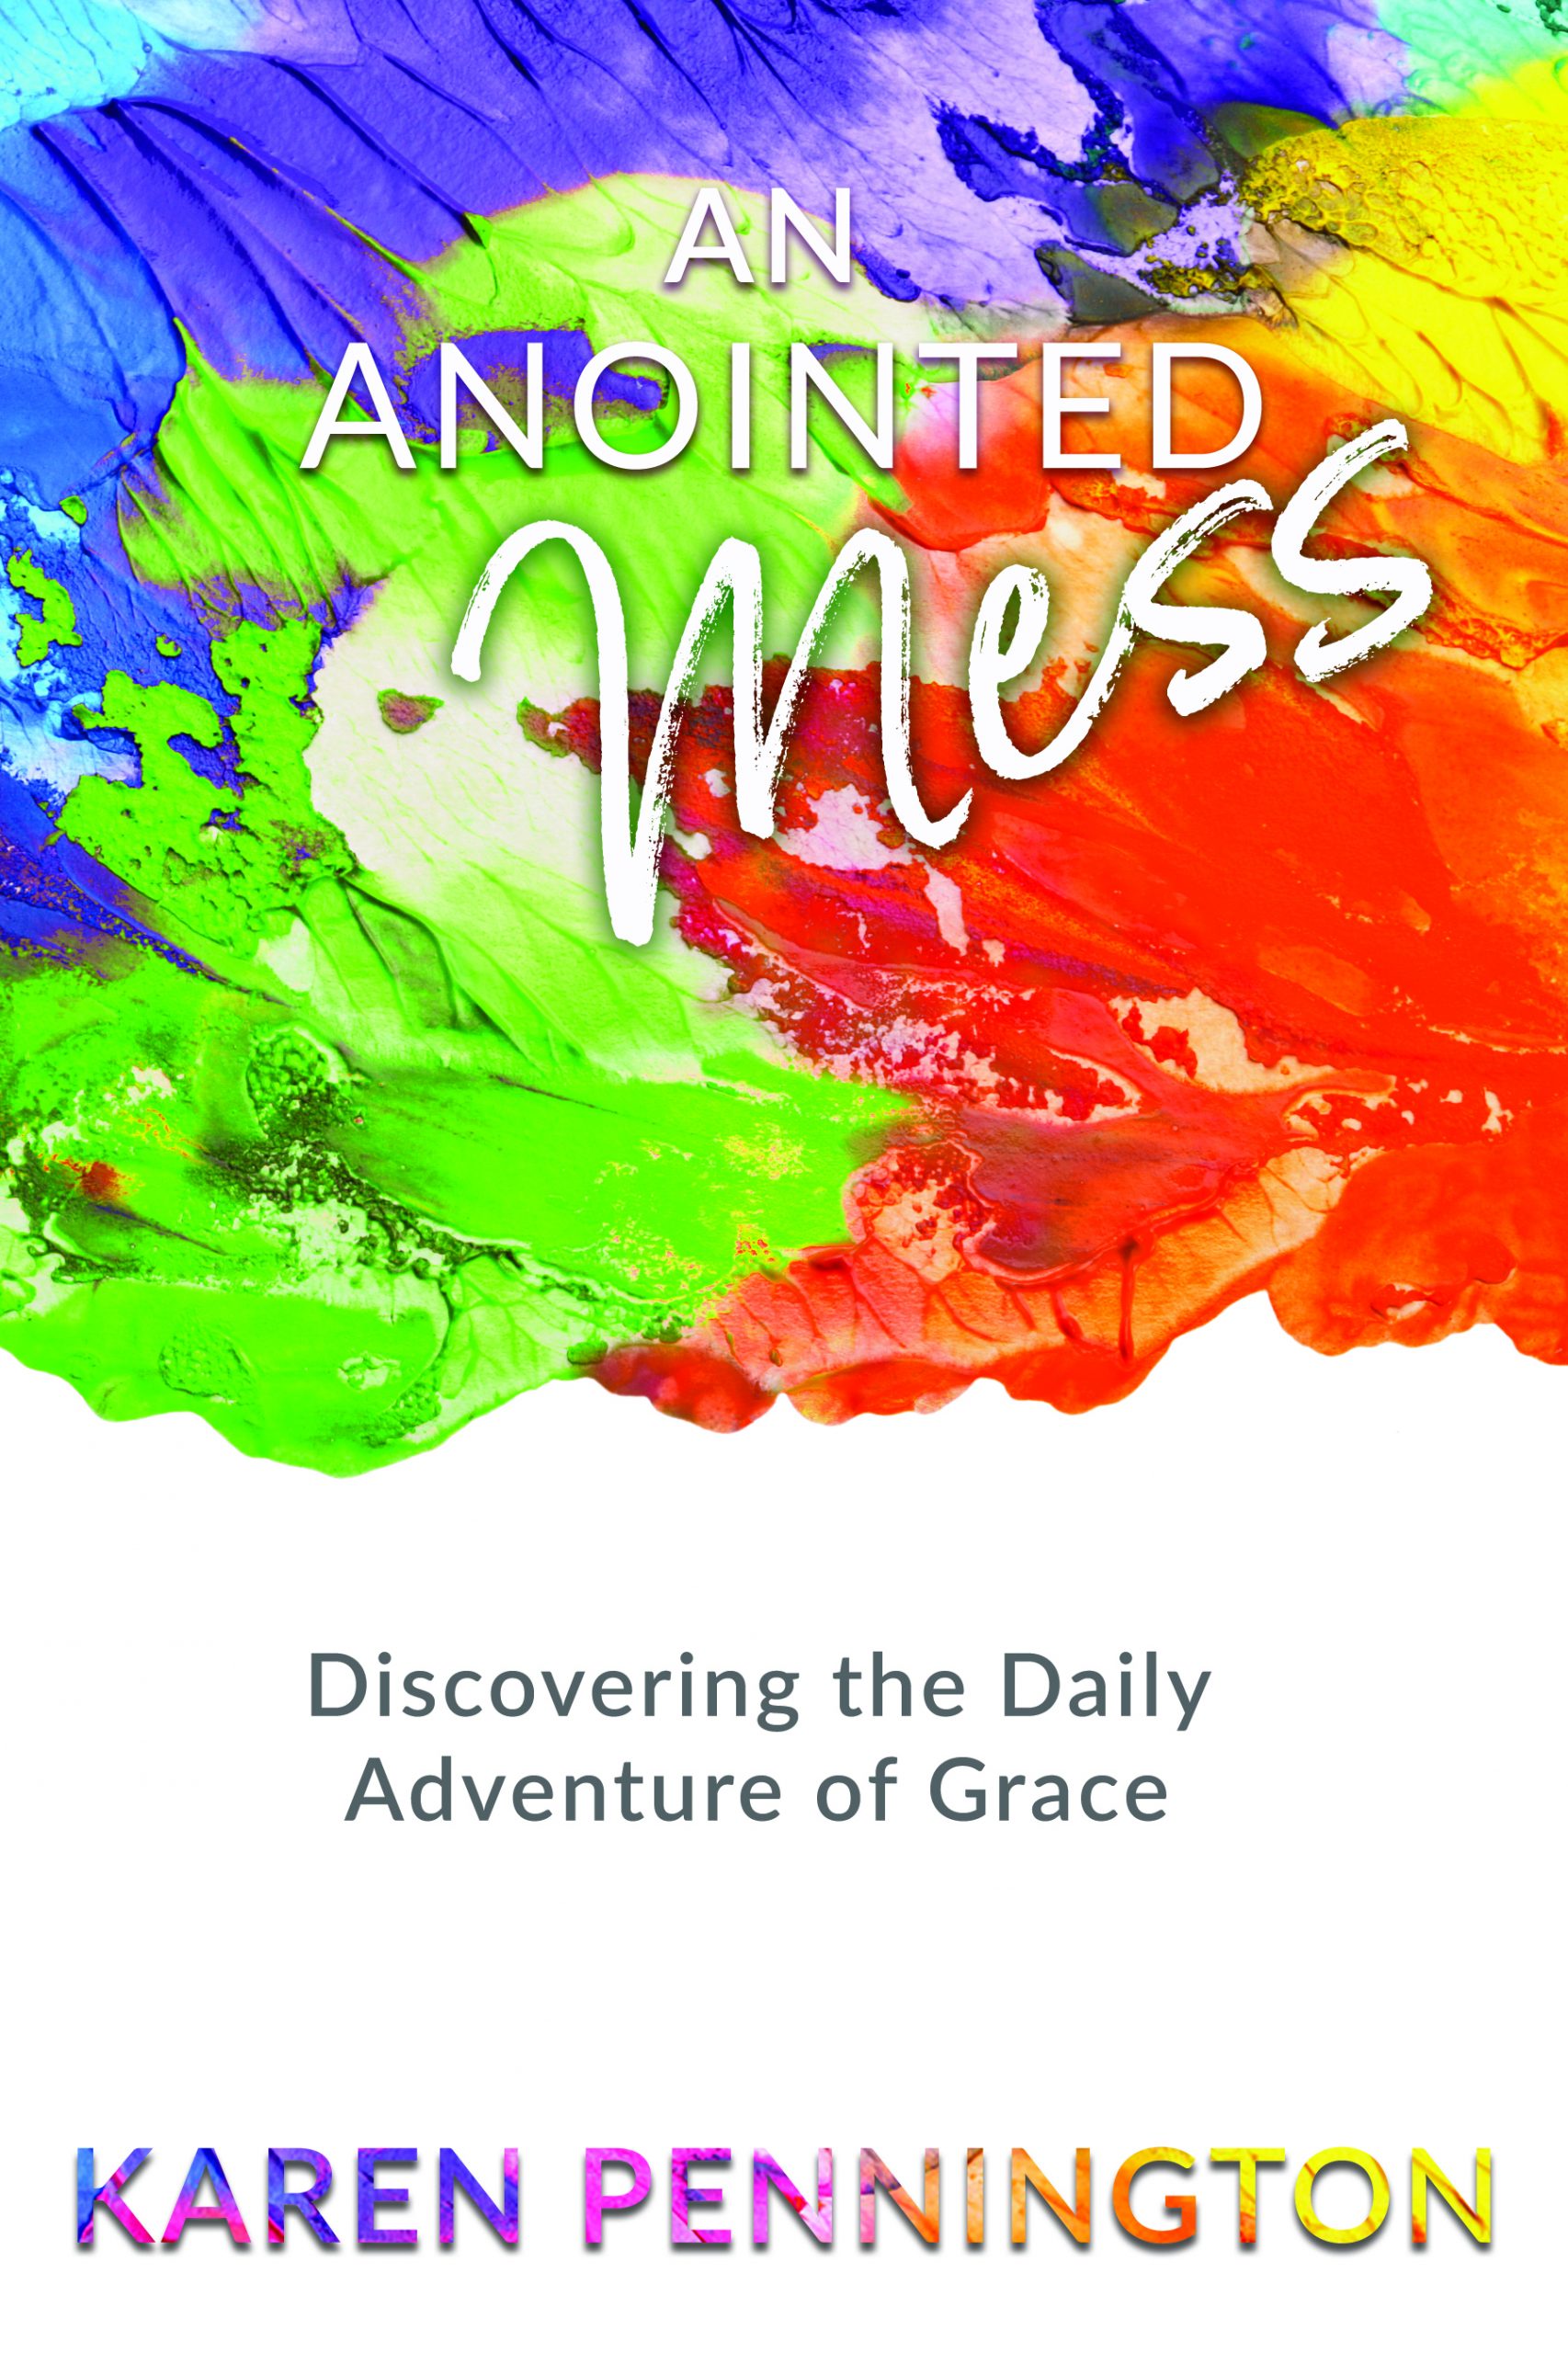 An Anointed Mess